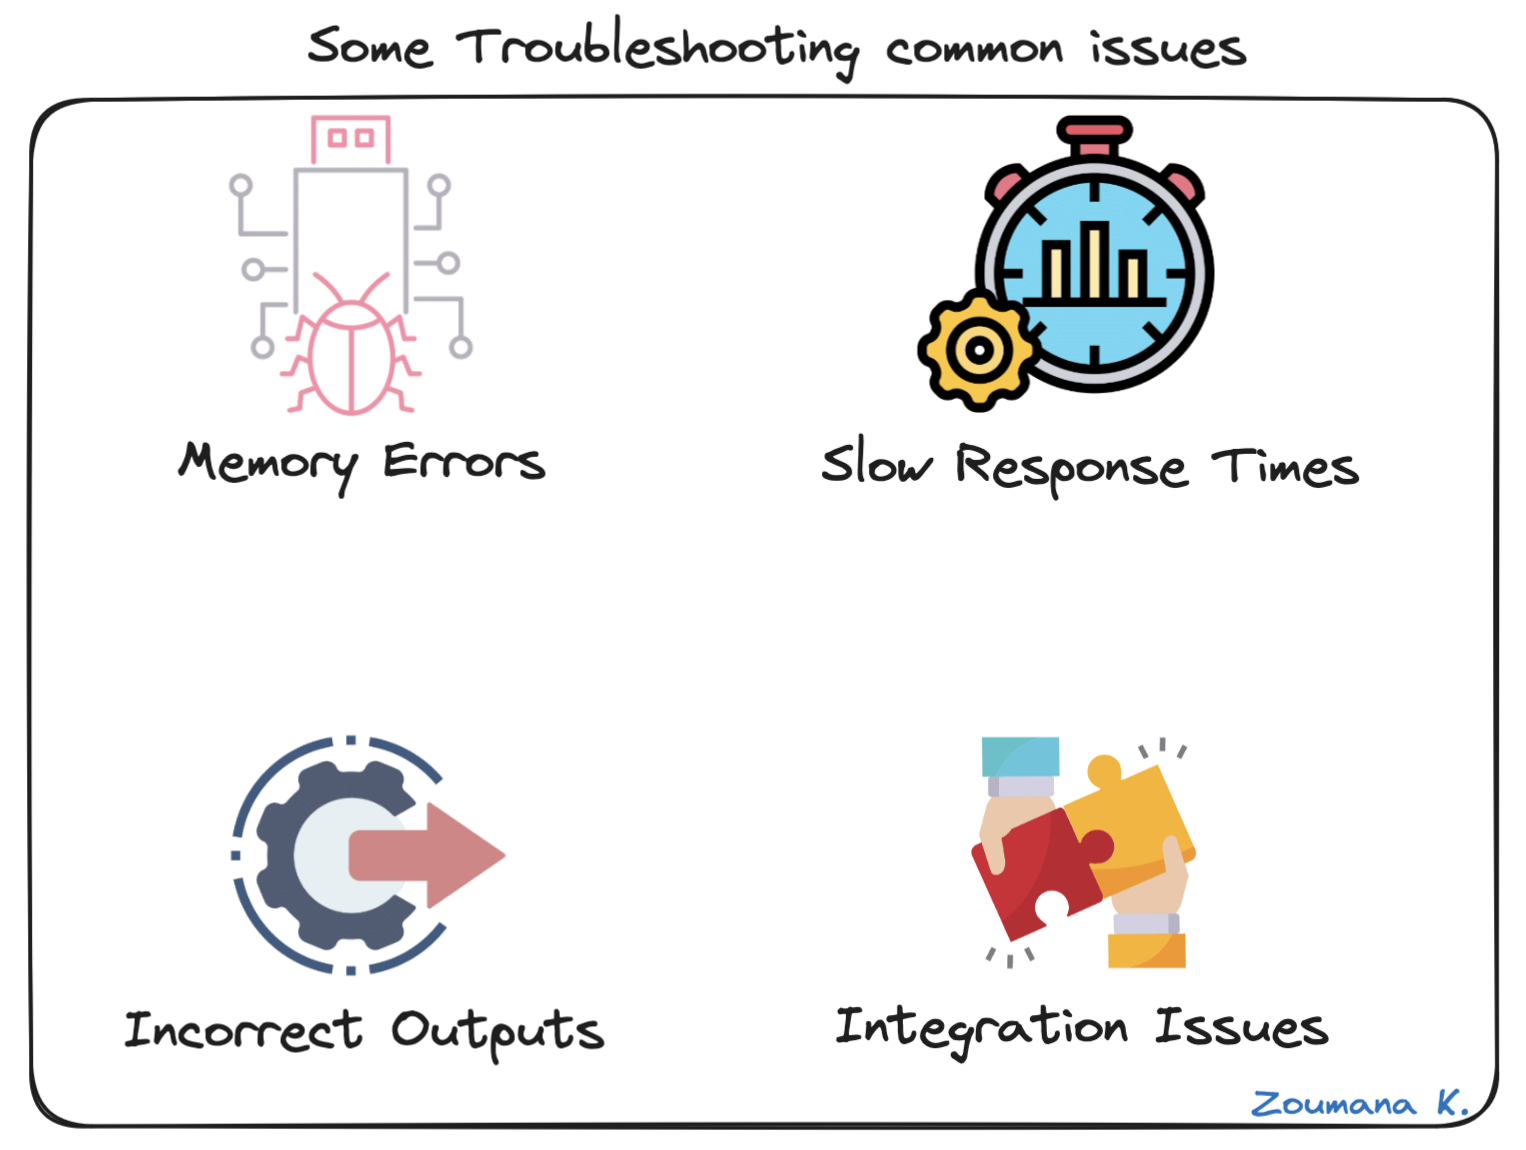 Some common troubleshooting issues